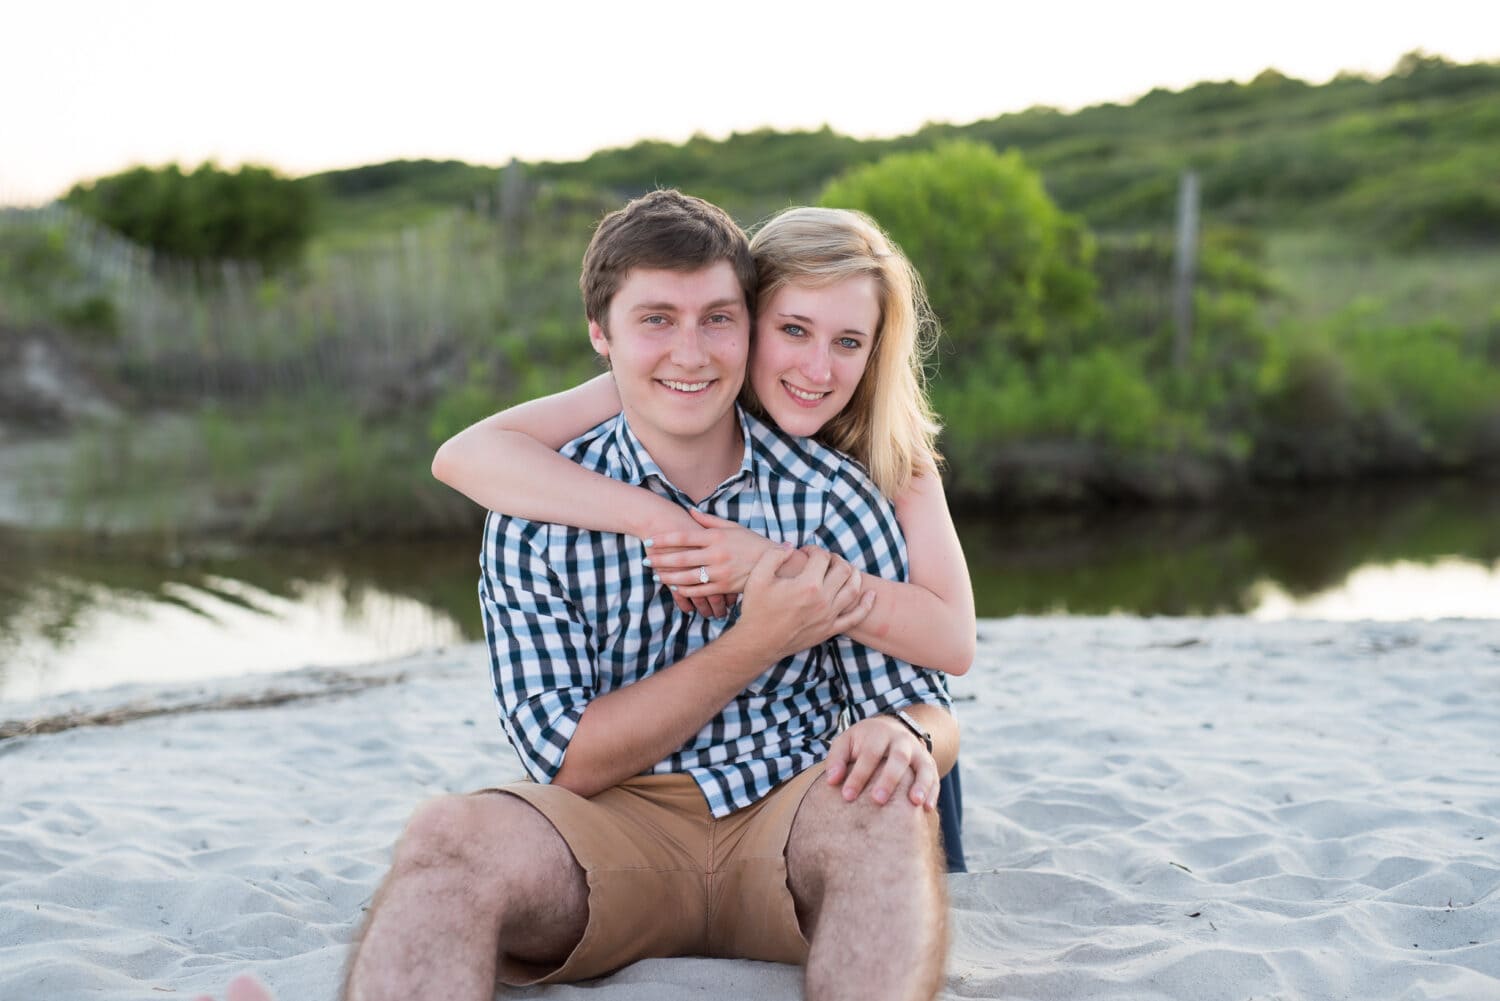 Cute couple - she just said yes to proposal - Myrtle Beach State Park